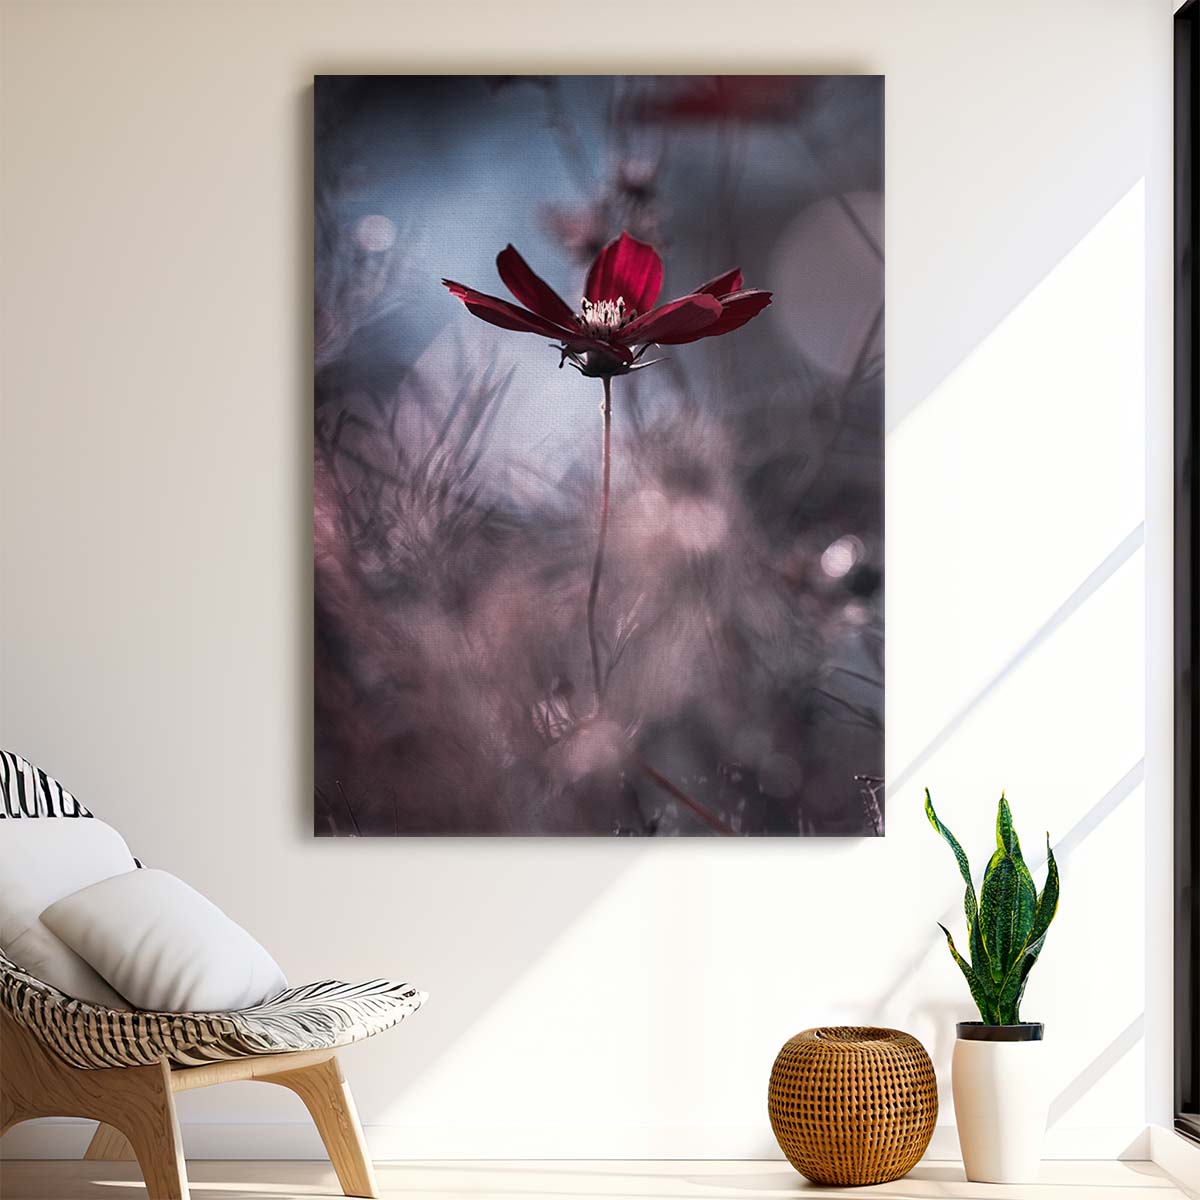 Delicate Red Flower Macro Photography Art by Fabien Bravin by Luxuriance Designs, made in USA